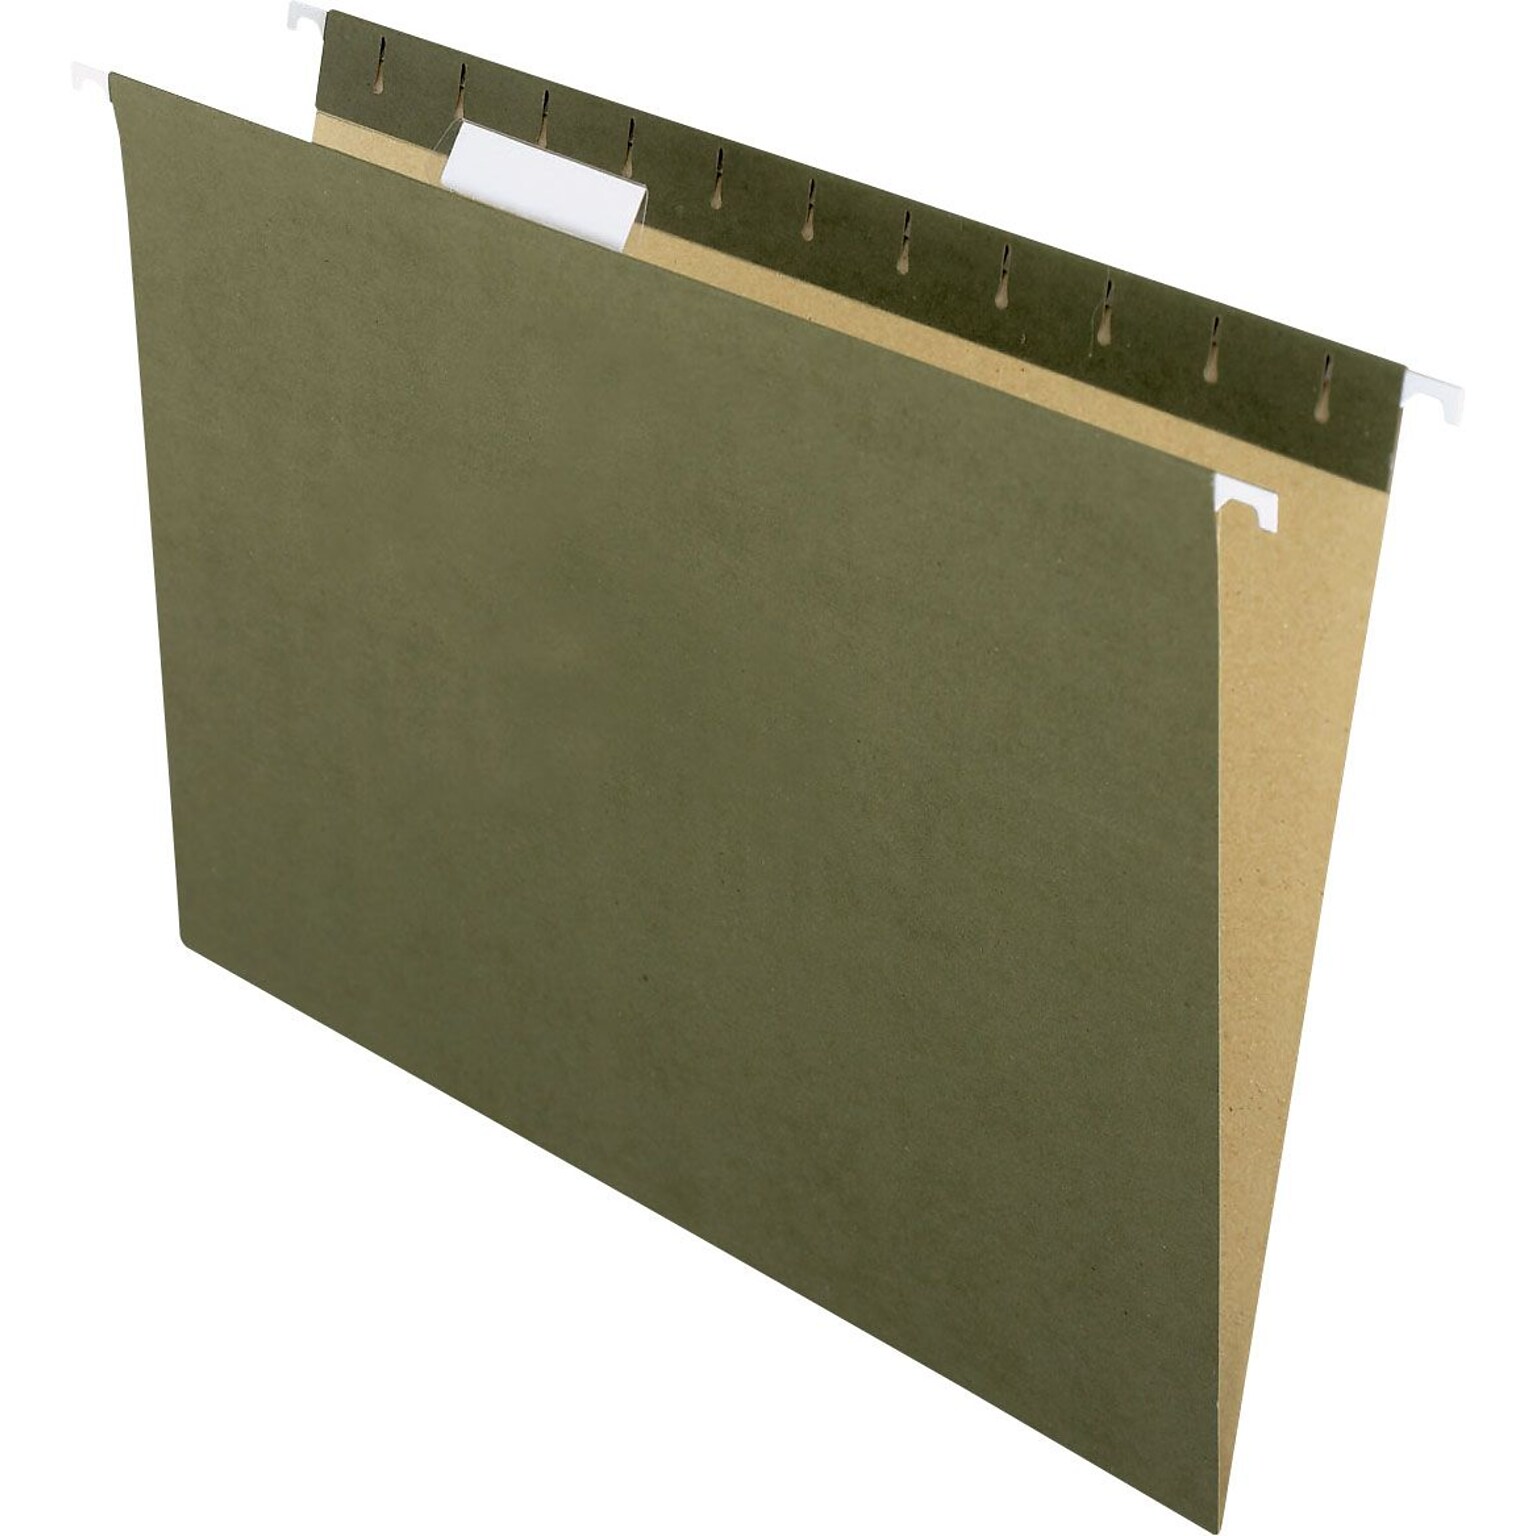 Pendaflex Earthwise Recycled Hanging File Folder, 3/4 Expansion, 5-Tab, Letter Size, Green, 25/Box (74517)